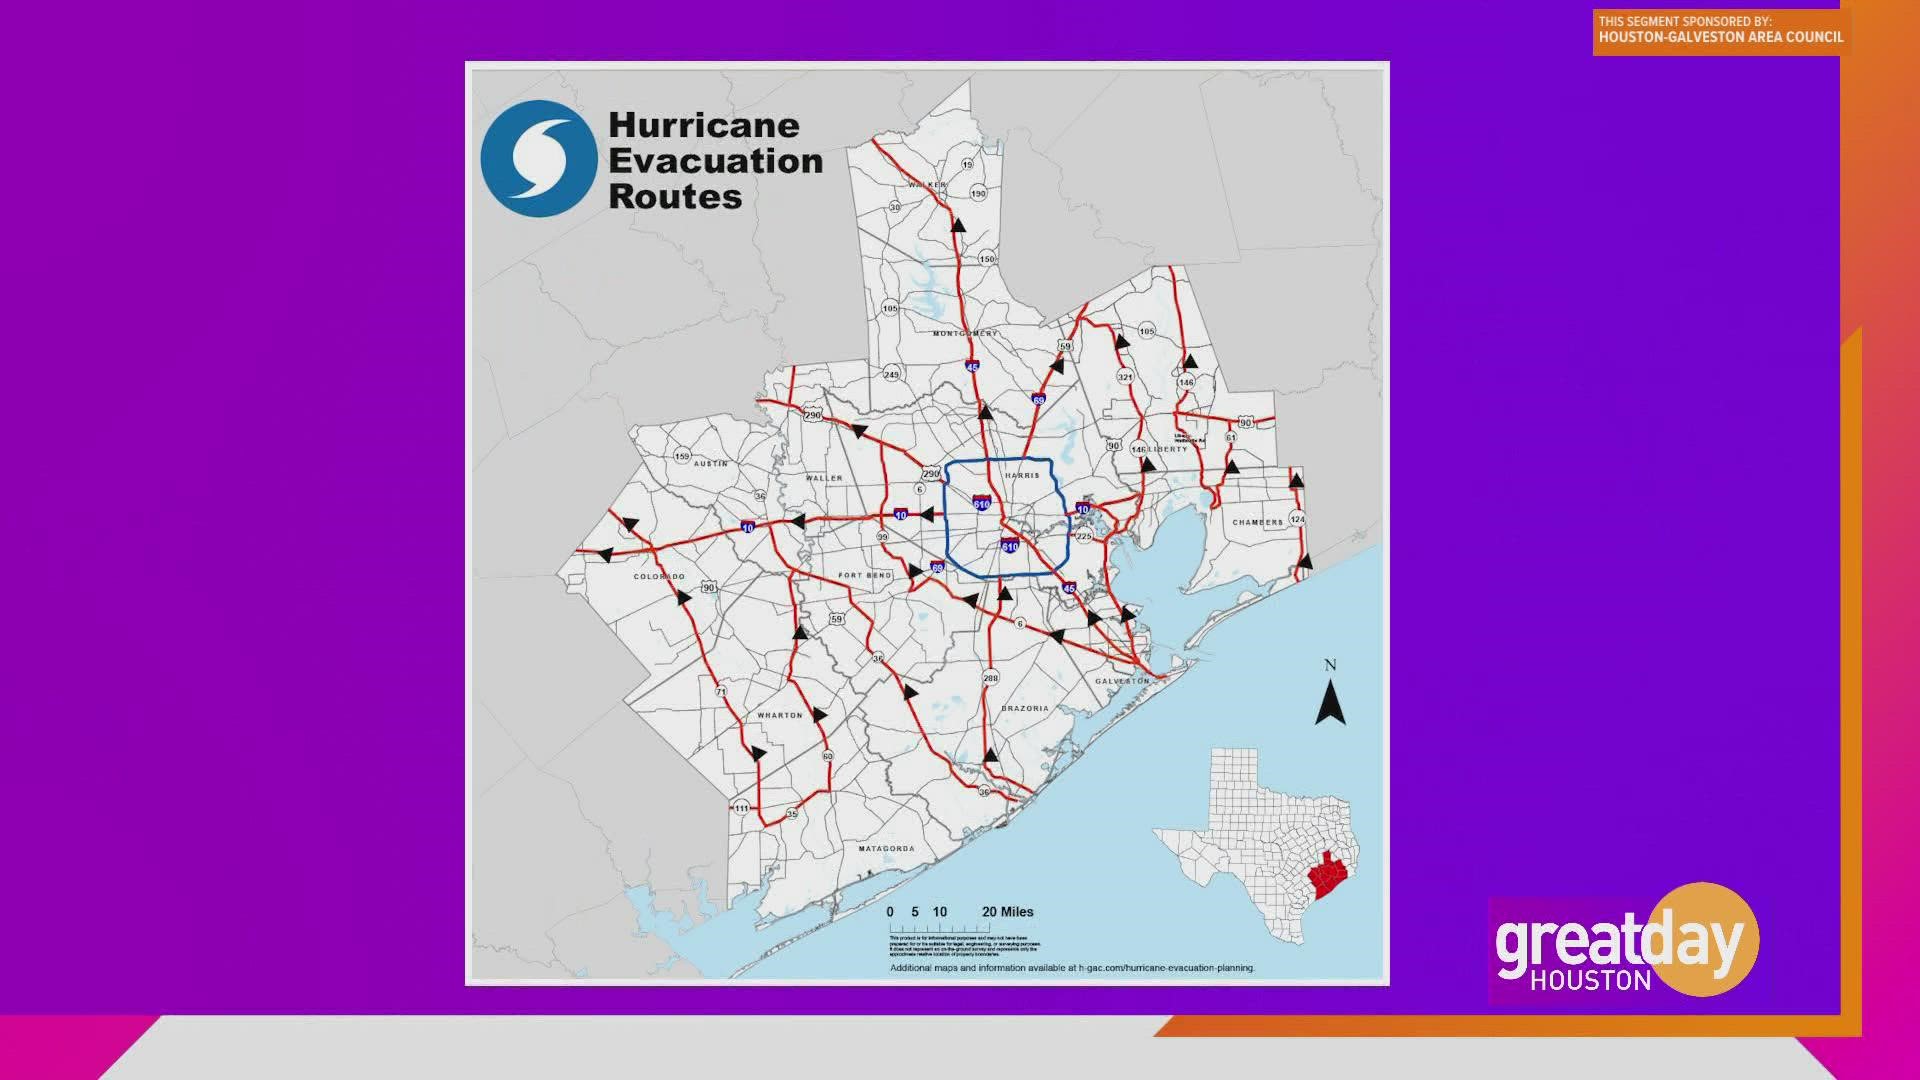 The Houston-Galveston Area Council provides crucial safety information for safety in severe weather